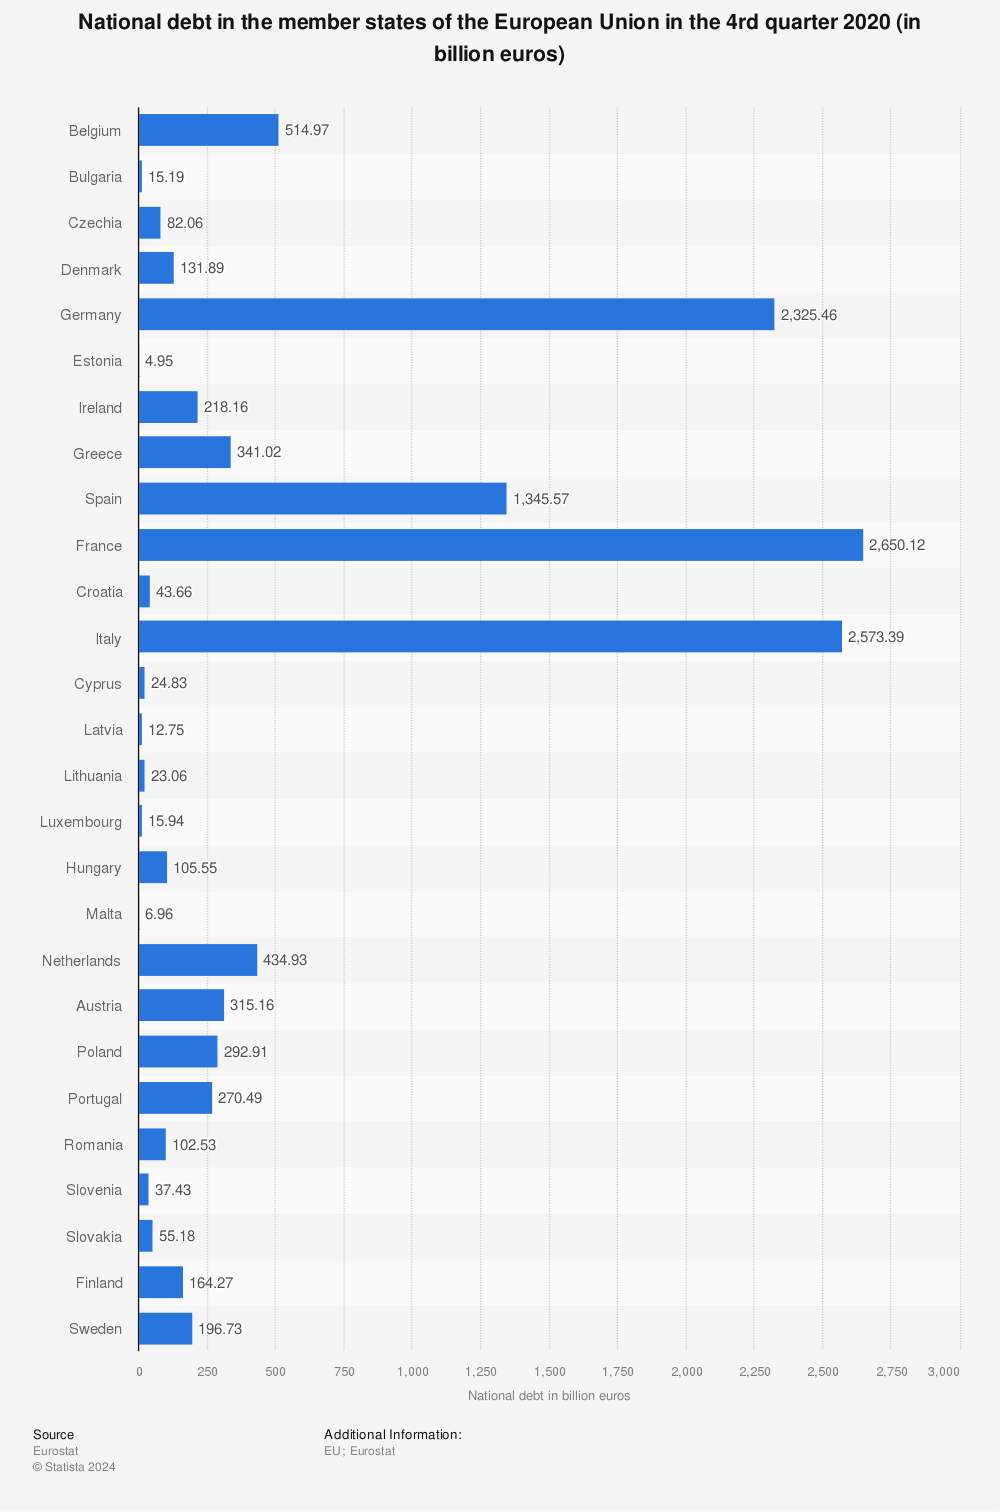 Statistic: National debt in the member states of the European Union in the 4rd quarter 2020 (in billion euros) | Statista